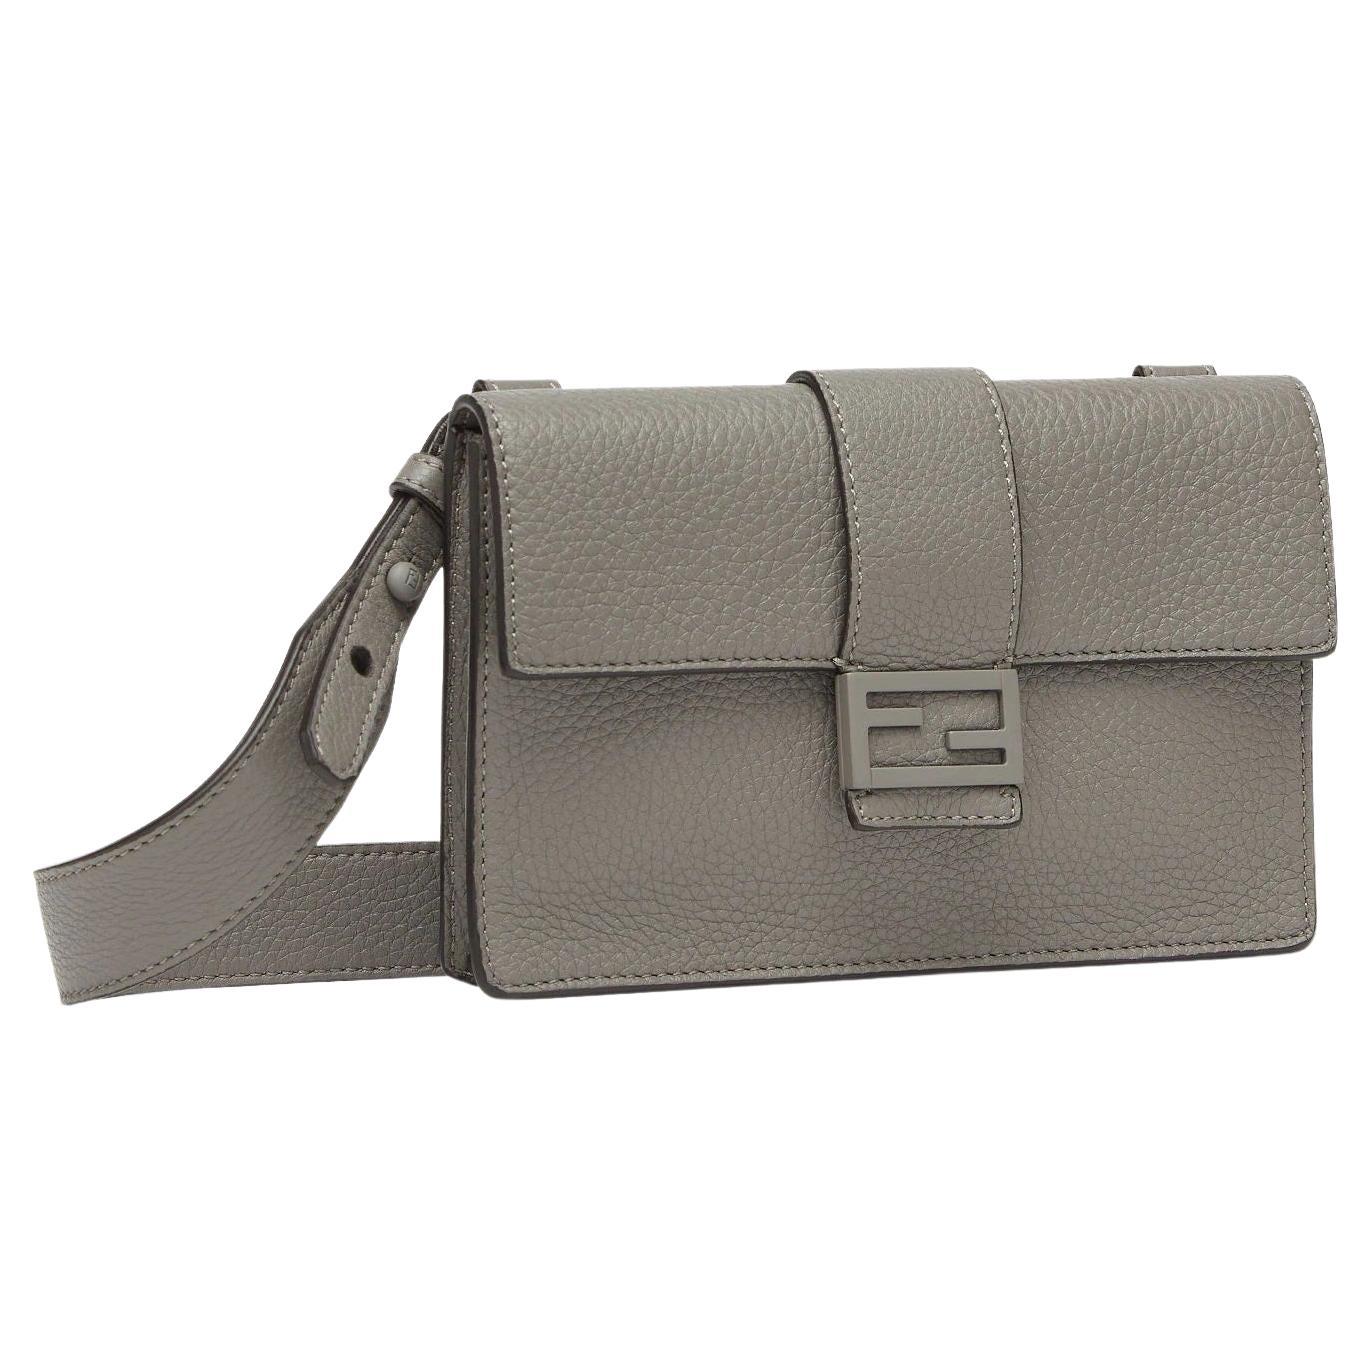 Baguette pouch with square flap and FF magnetic clasp. Can be worn on the waist, over the shoulder or cross-body by attaching the removable strap. Inside: lining with zipped pocket.